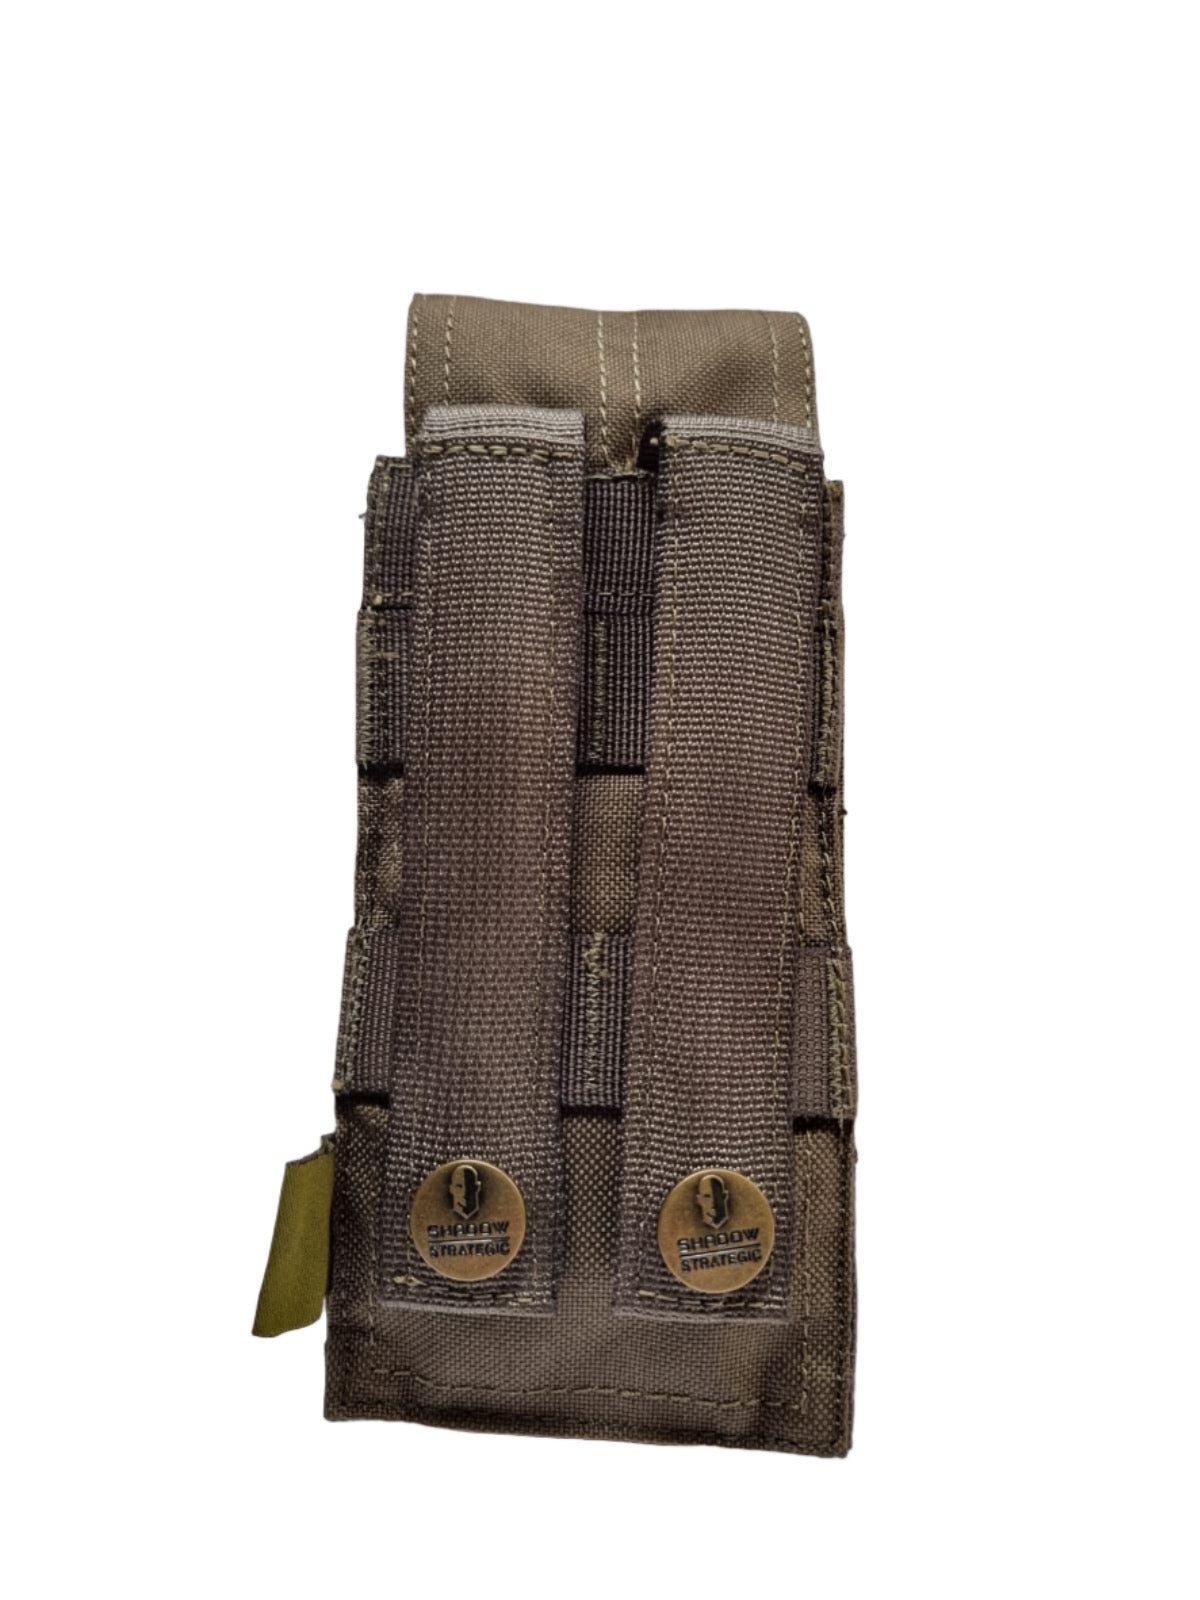 SHE-920 SINGLE M4 5.56MM MAG POUCH COLOR ARMY GREEN BACKSIDE PIC